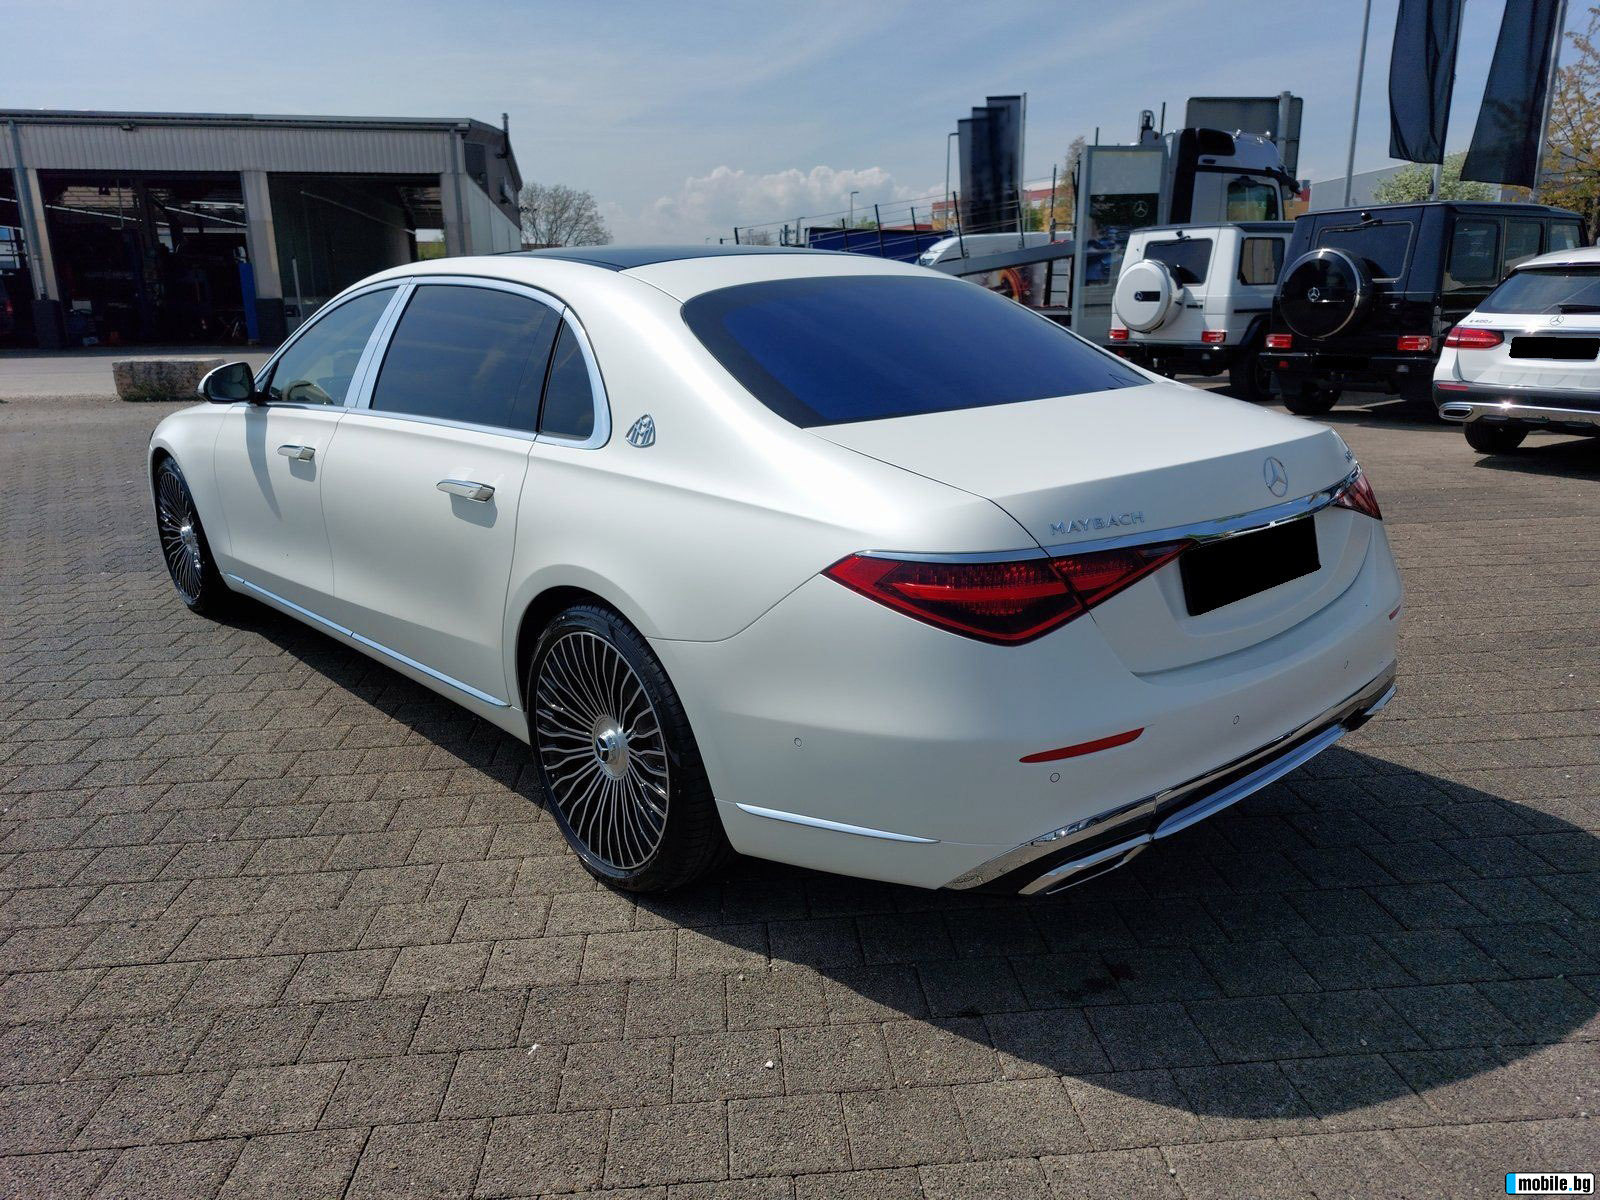 Mercedes-Benz S580 Maybach 4Matic =First Class= Exclusive  | Mobile.bg   2